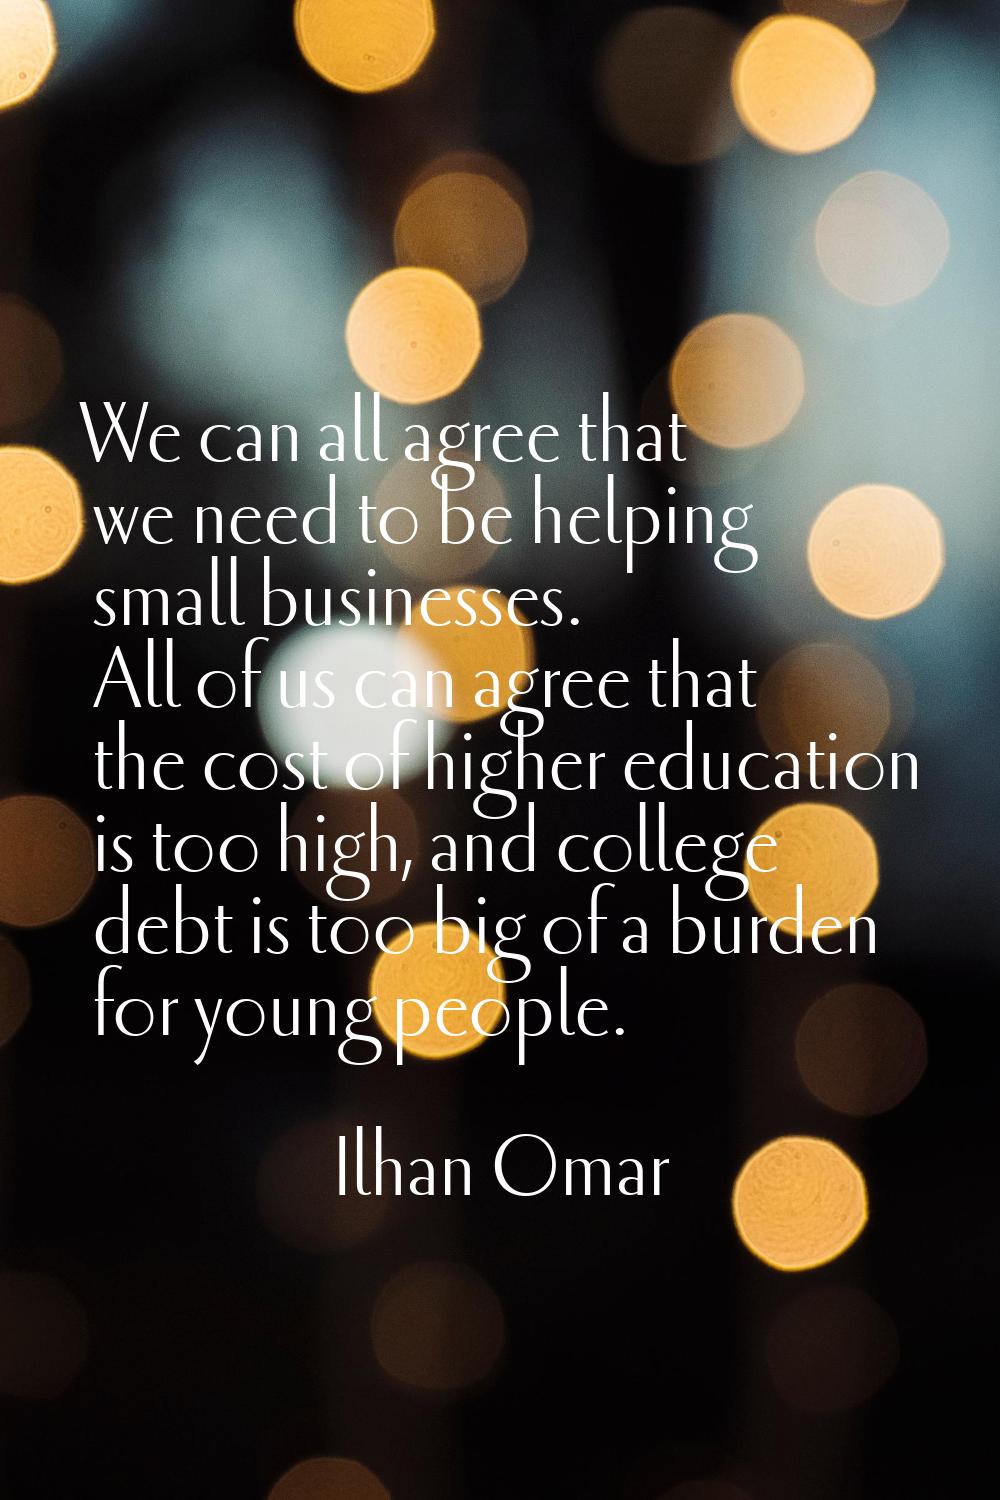 We can all agree that we need to be helping small businesses. All of us can agree that the cost of 